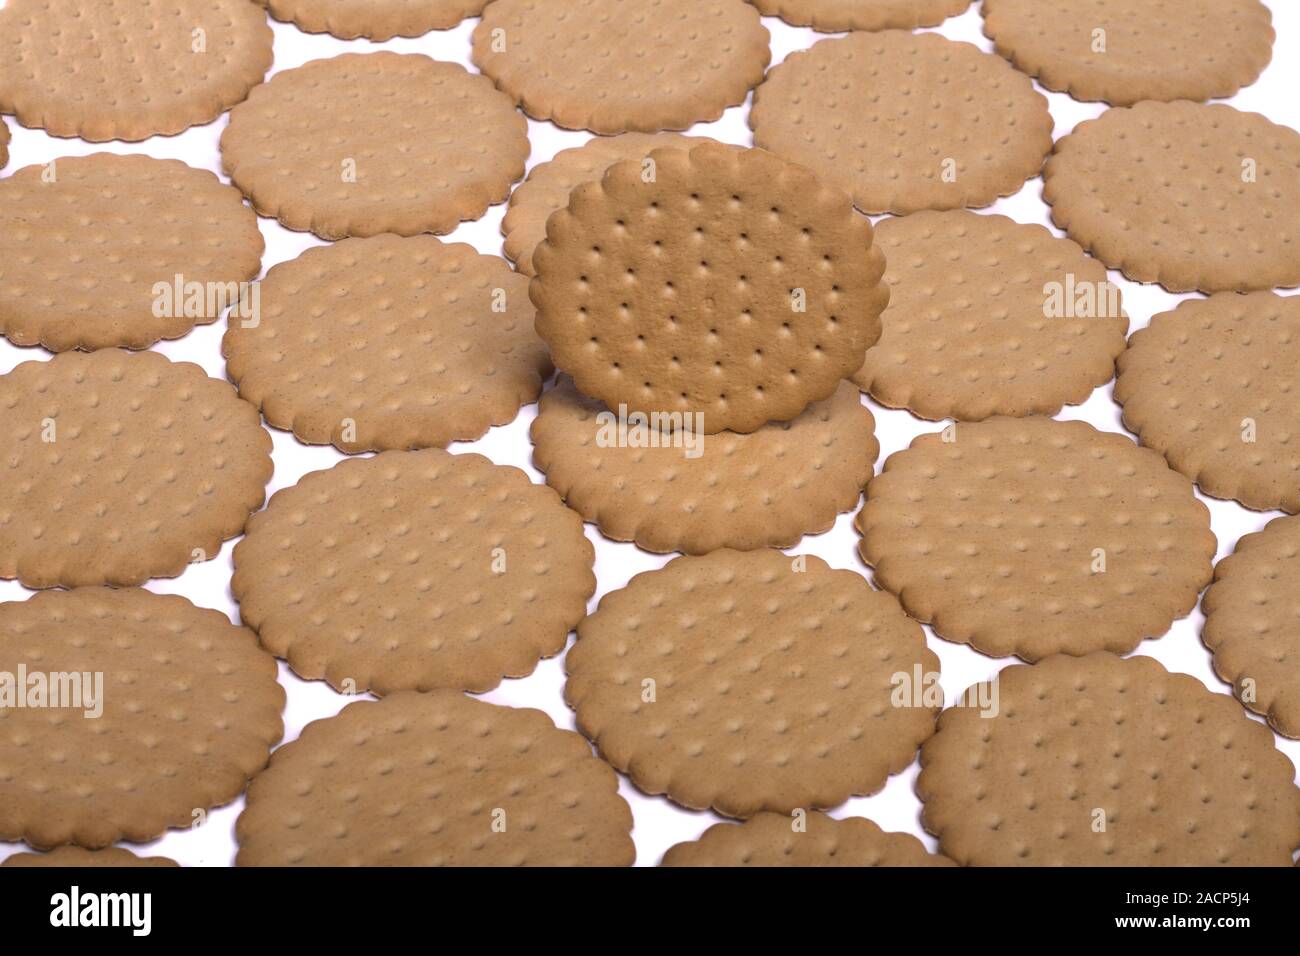 many biscuits Stock Photo